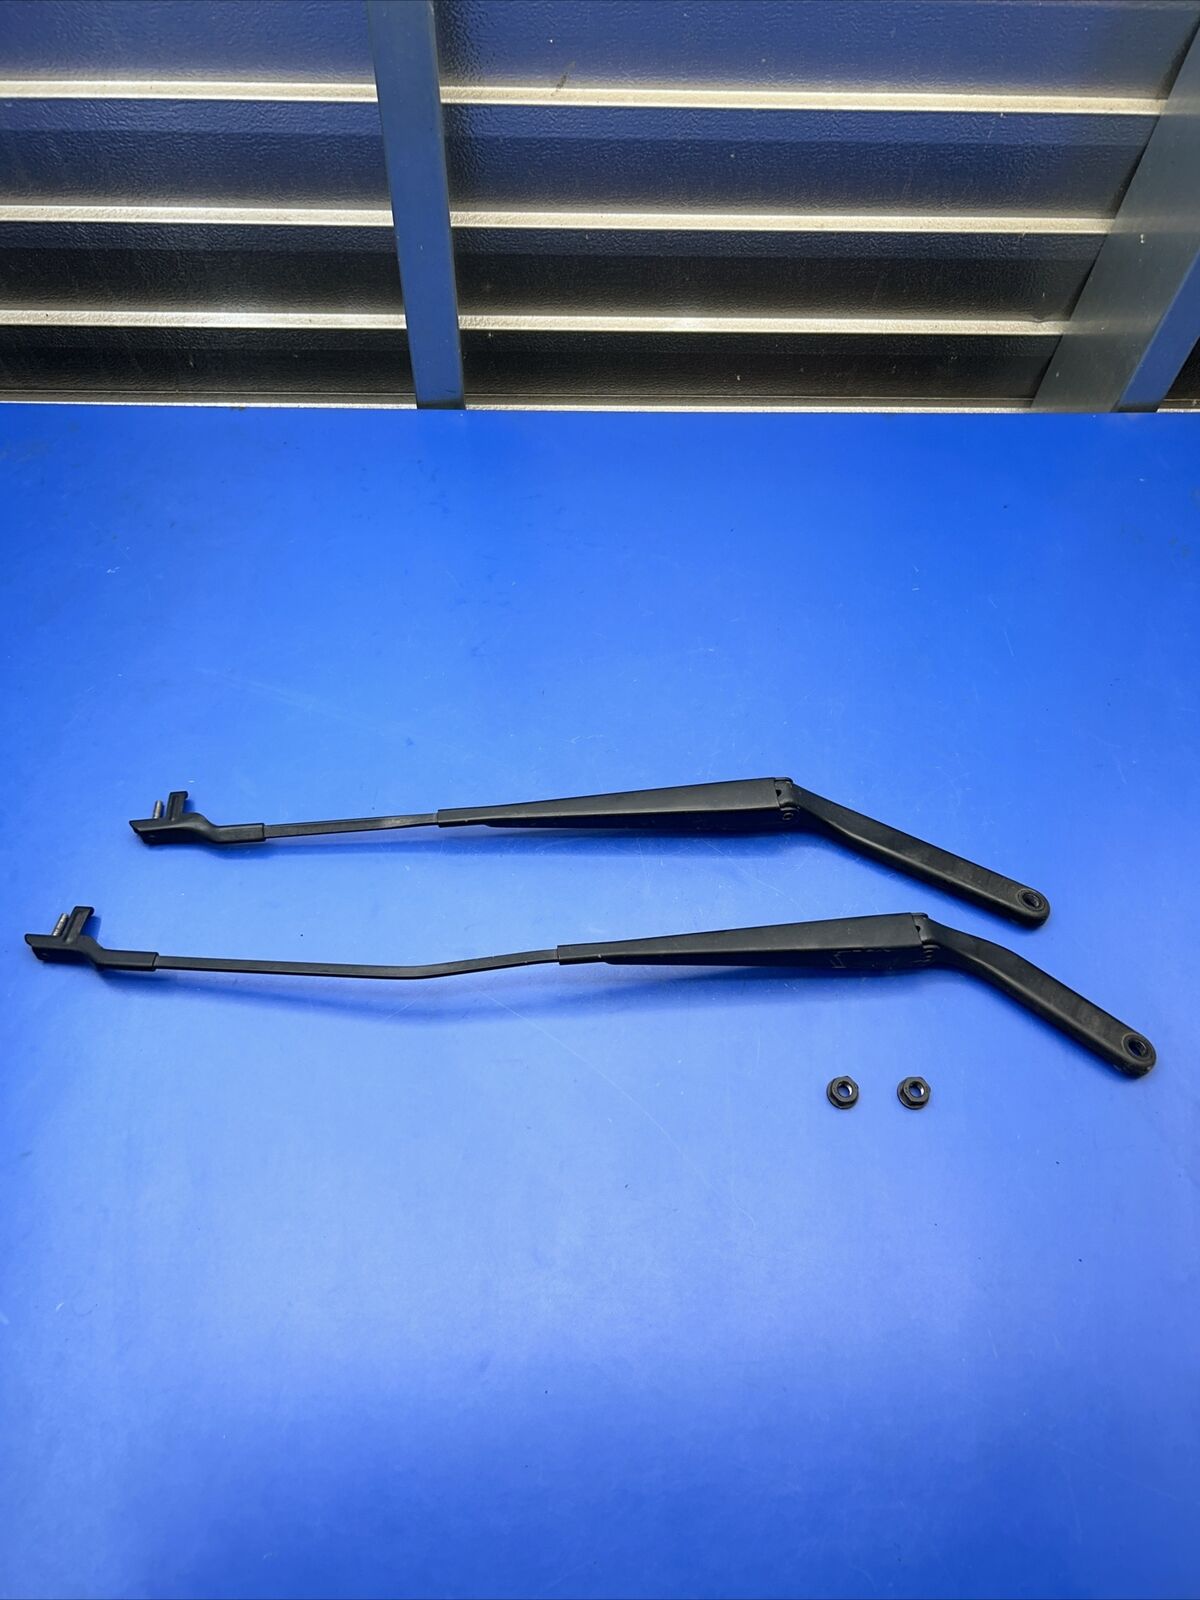 07-13 BMW E70 X5 FRONT RIGHT & LEFT WINDSHIELD WIPER ARM SET OEM